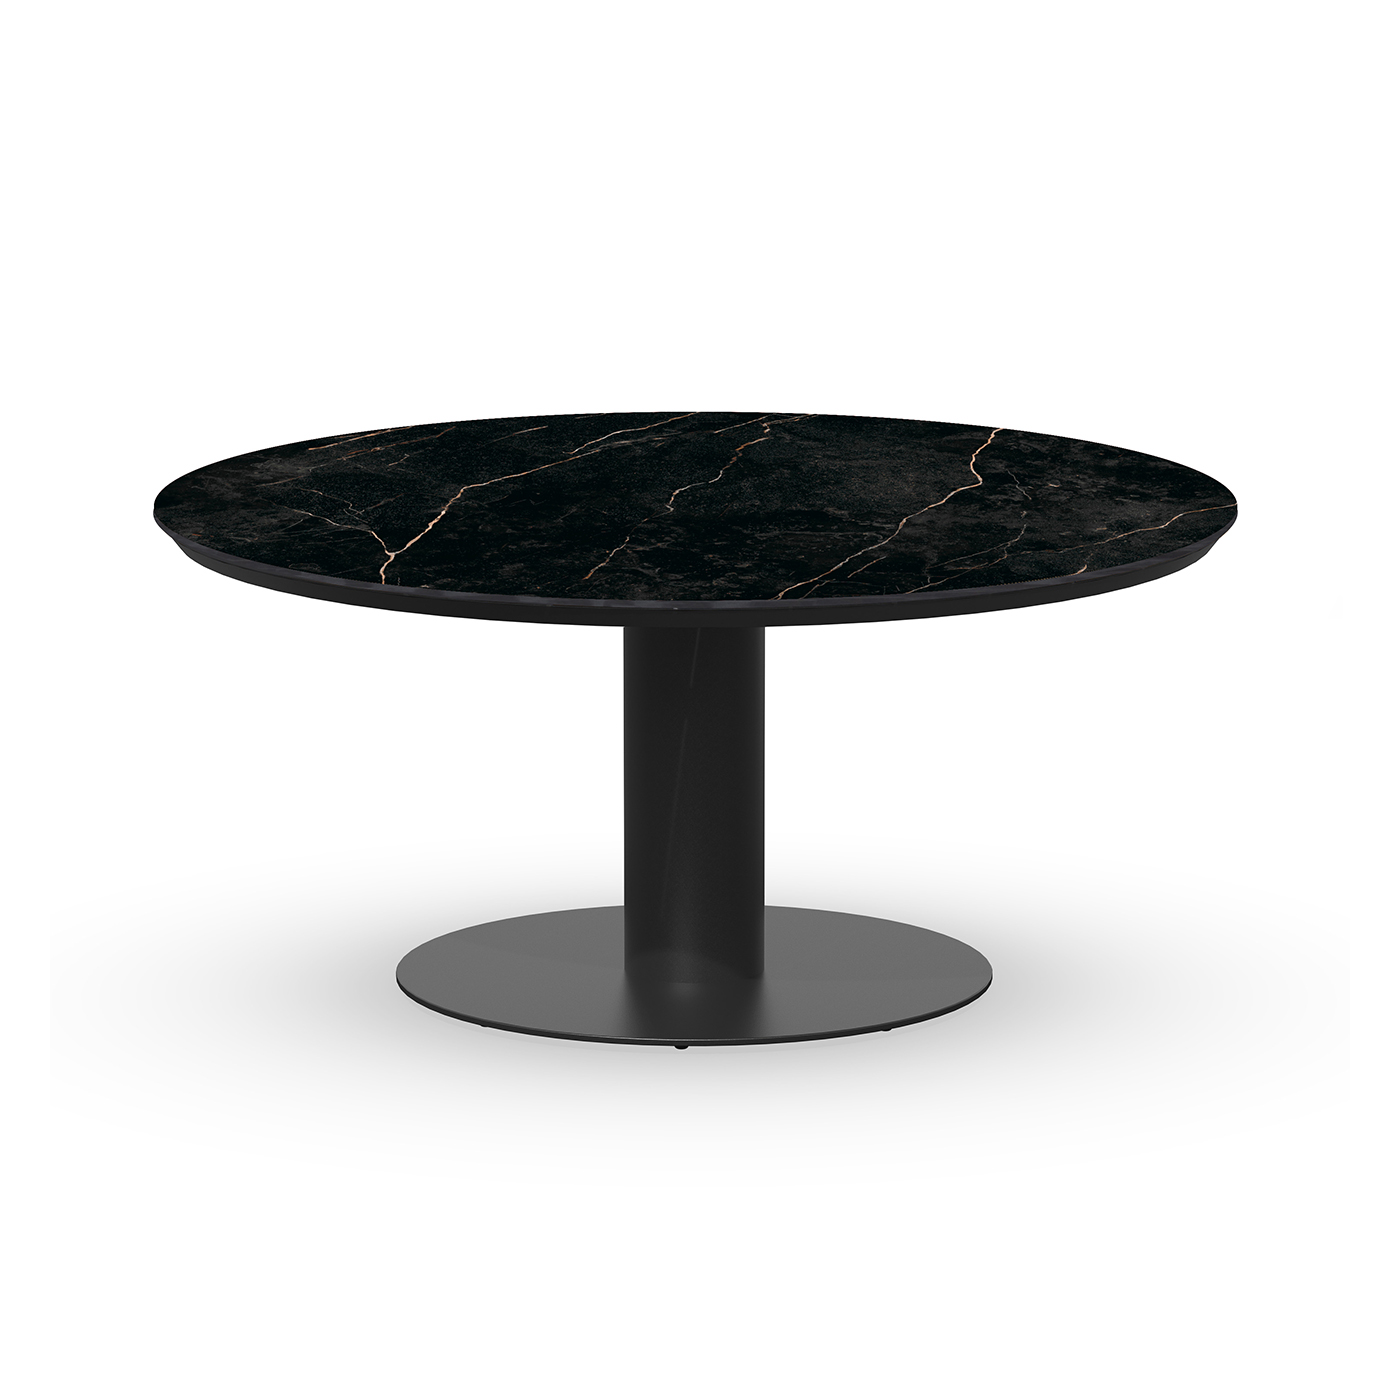 Moreno Low Dining Table Trespa Marble 150 cm Ø Charcoal